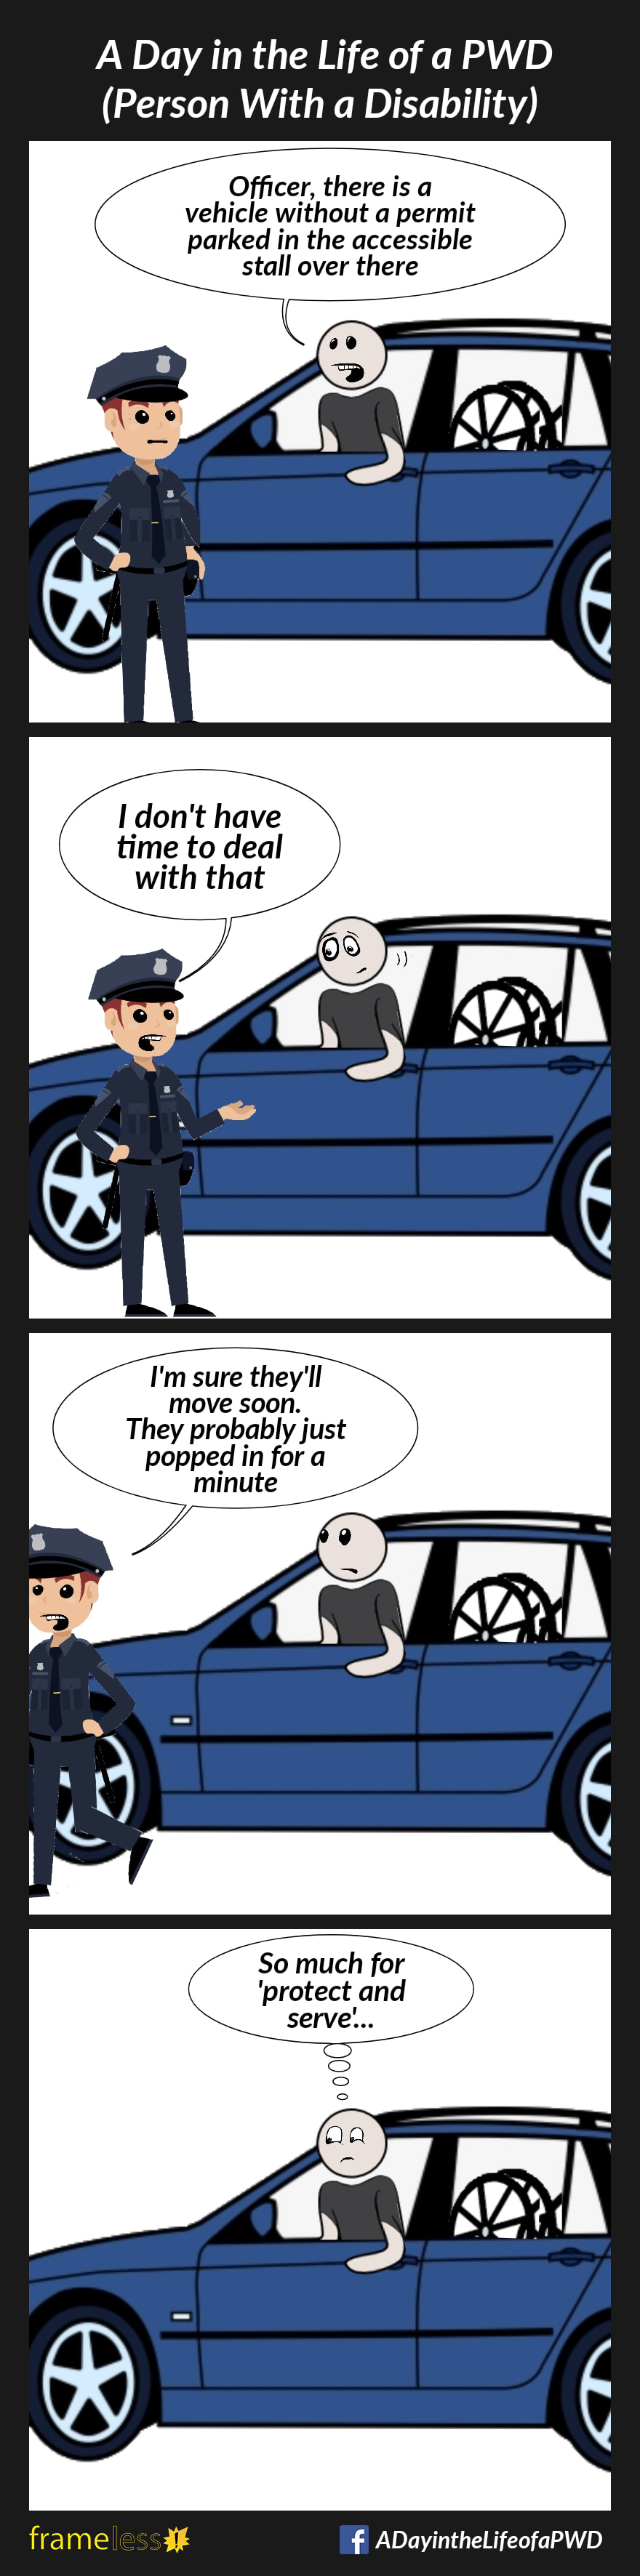 COMIC STRIP
A Day in the Life of a PWD

Frame 1:
A man driver a car with his manual wheelchair in the back seat talks to a police officer.
MAN: Officer, There is a vehicle without a permit parked in the accessible stall over there.

Frame 2:
OFFICER: I don't have time to deal with that

Frame 3:
OFFICER (walking away): I'm sure they'll move soon. They probably just popped in for a minute.

Frame 4:
MAN (thinking): So much for 'protect and serve'...